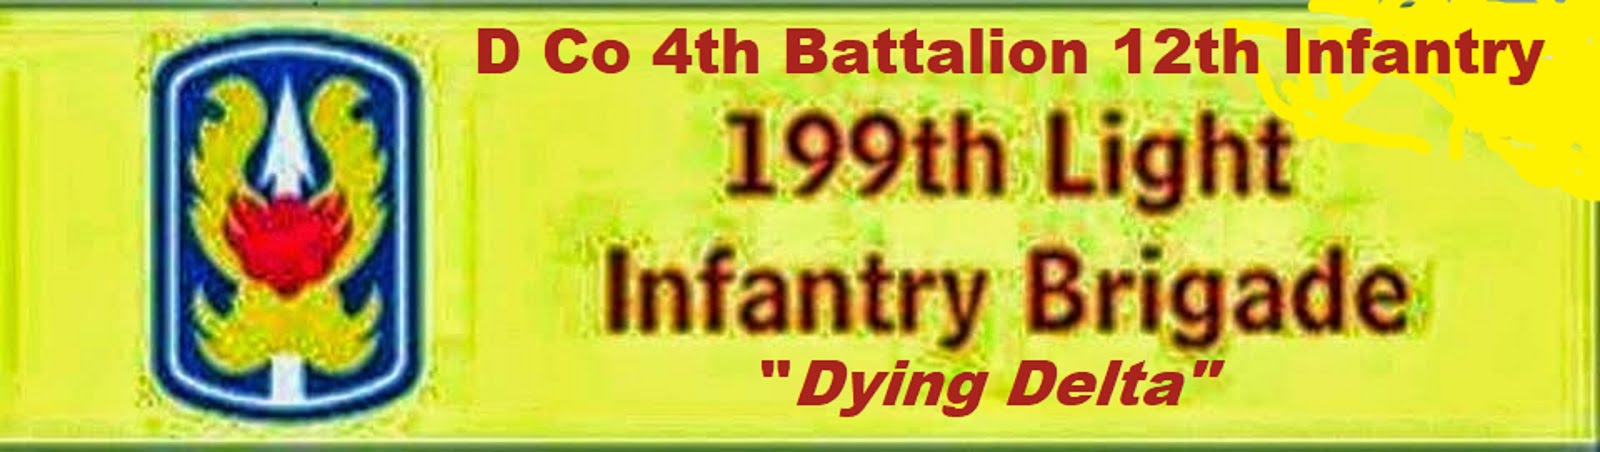 D CO 4th BATTALION 12th LIGHT INFANTRY BRIGADE "DYING DELTA"